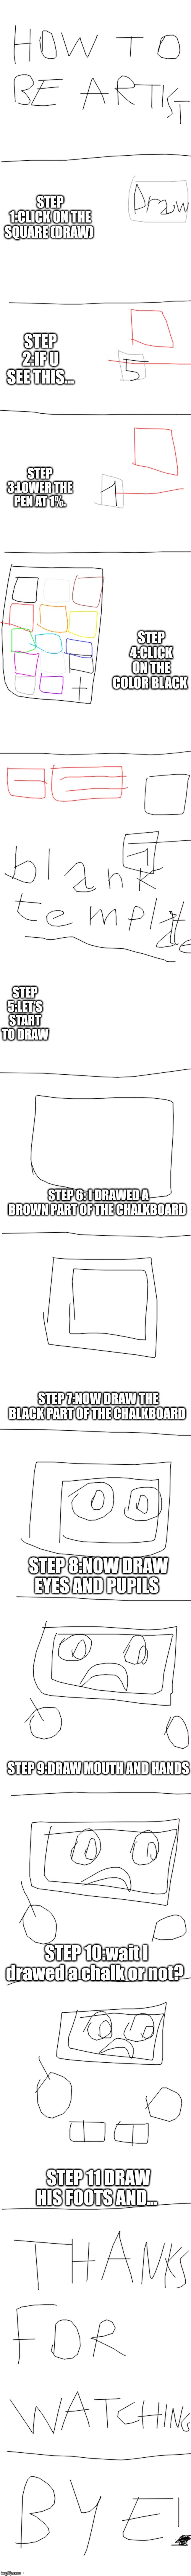 How to draw Doodleboard from Book of Monsters | STEP 1:CLICK ON THE SQUARE (DRAW); STEP 2:IF U SEE THIS... STEP 3:LOWER THE PEN AT 1%. STEP 4:CLICK ON THE COLOR BLACK; STEP 5:LET'S START TO DRAW; STEP 6: I DRAWED A BROWN PART OF THE CHALKBOARD; STEP 7:NOW DRAW THE BLACK PART OF THE CHALKBOARD; STEP 8:NOW DRAW EYES AND PUPILS; STEP 9:DRAW MOUTH AND HANDS; STEP 10:wait I drawed a chalk or not? STEP 11 DRAW HIS FOOTS AND... | image tagged in long white template,doodleboard from book of monsters | made w/ Imgflip meme maker